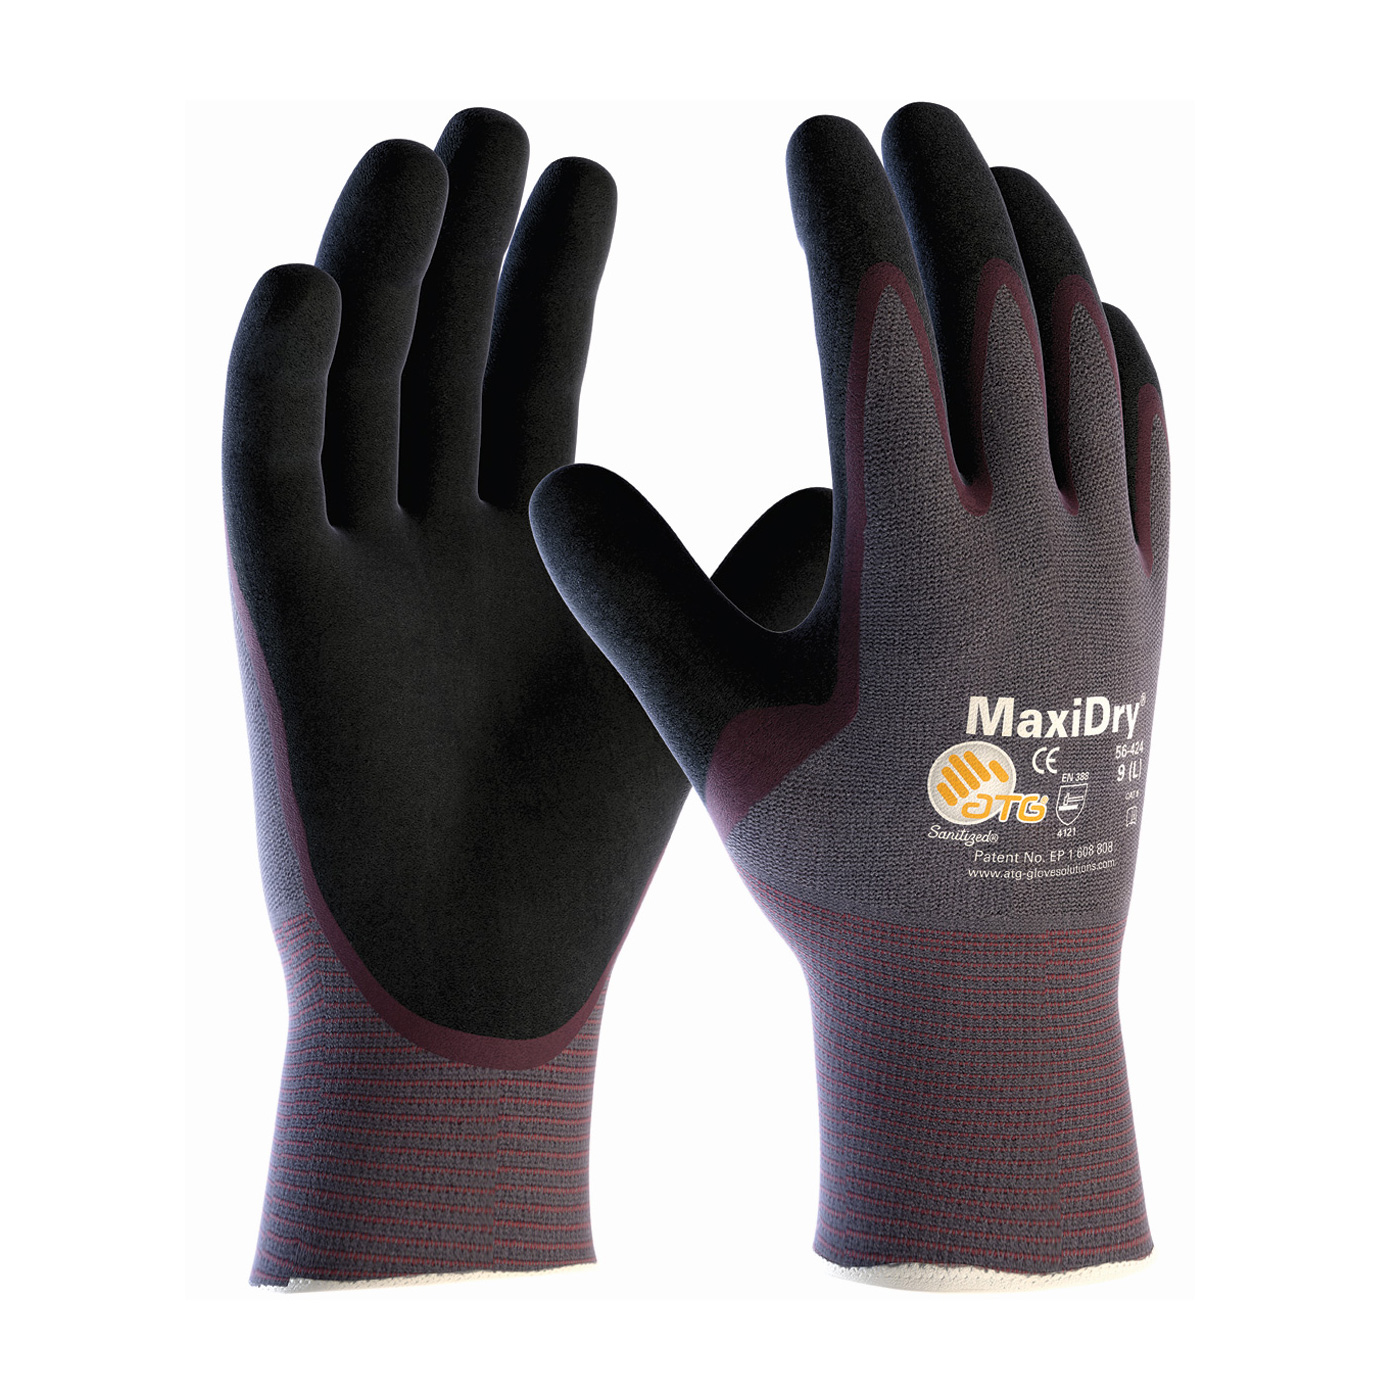 ULTRA LIGHTWEIGHT NITRILE GLOVE, PALM DIPPED WITH SEAMLESS KNIT NYLON / ELASTANE LINER AND NON-SLIP GRIP ON PALM & FINGERS